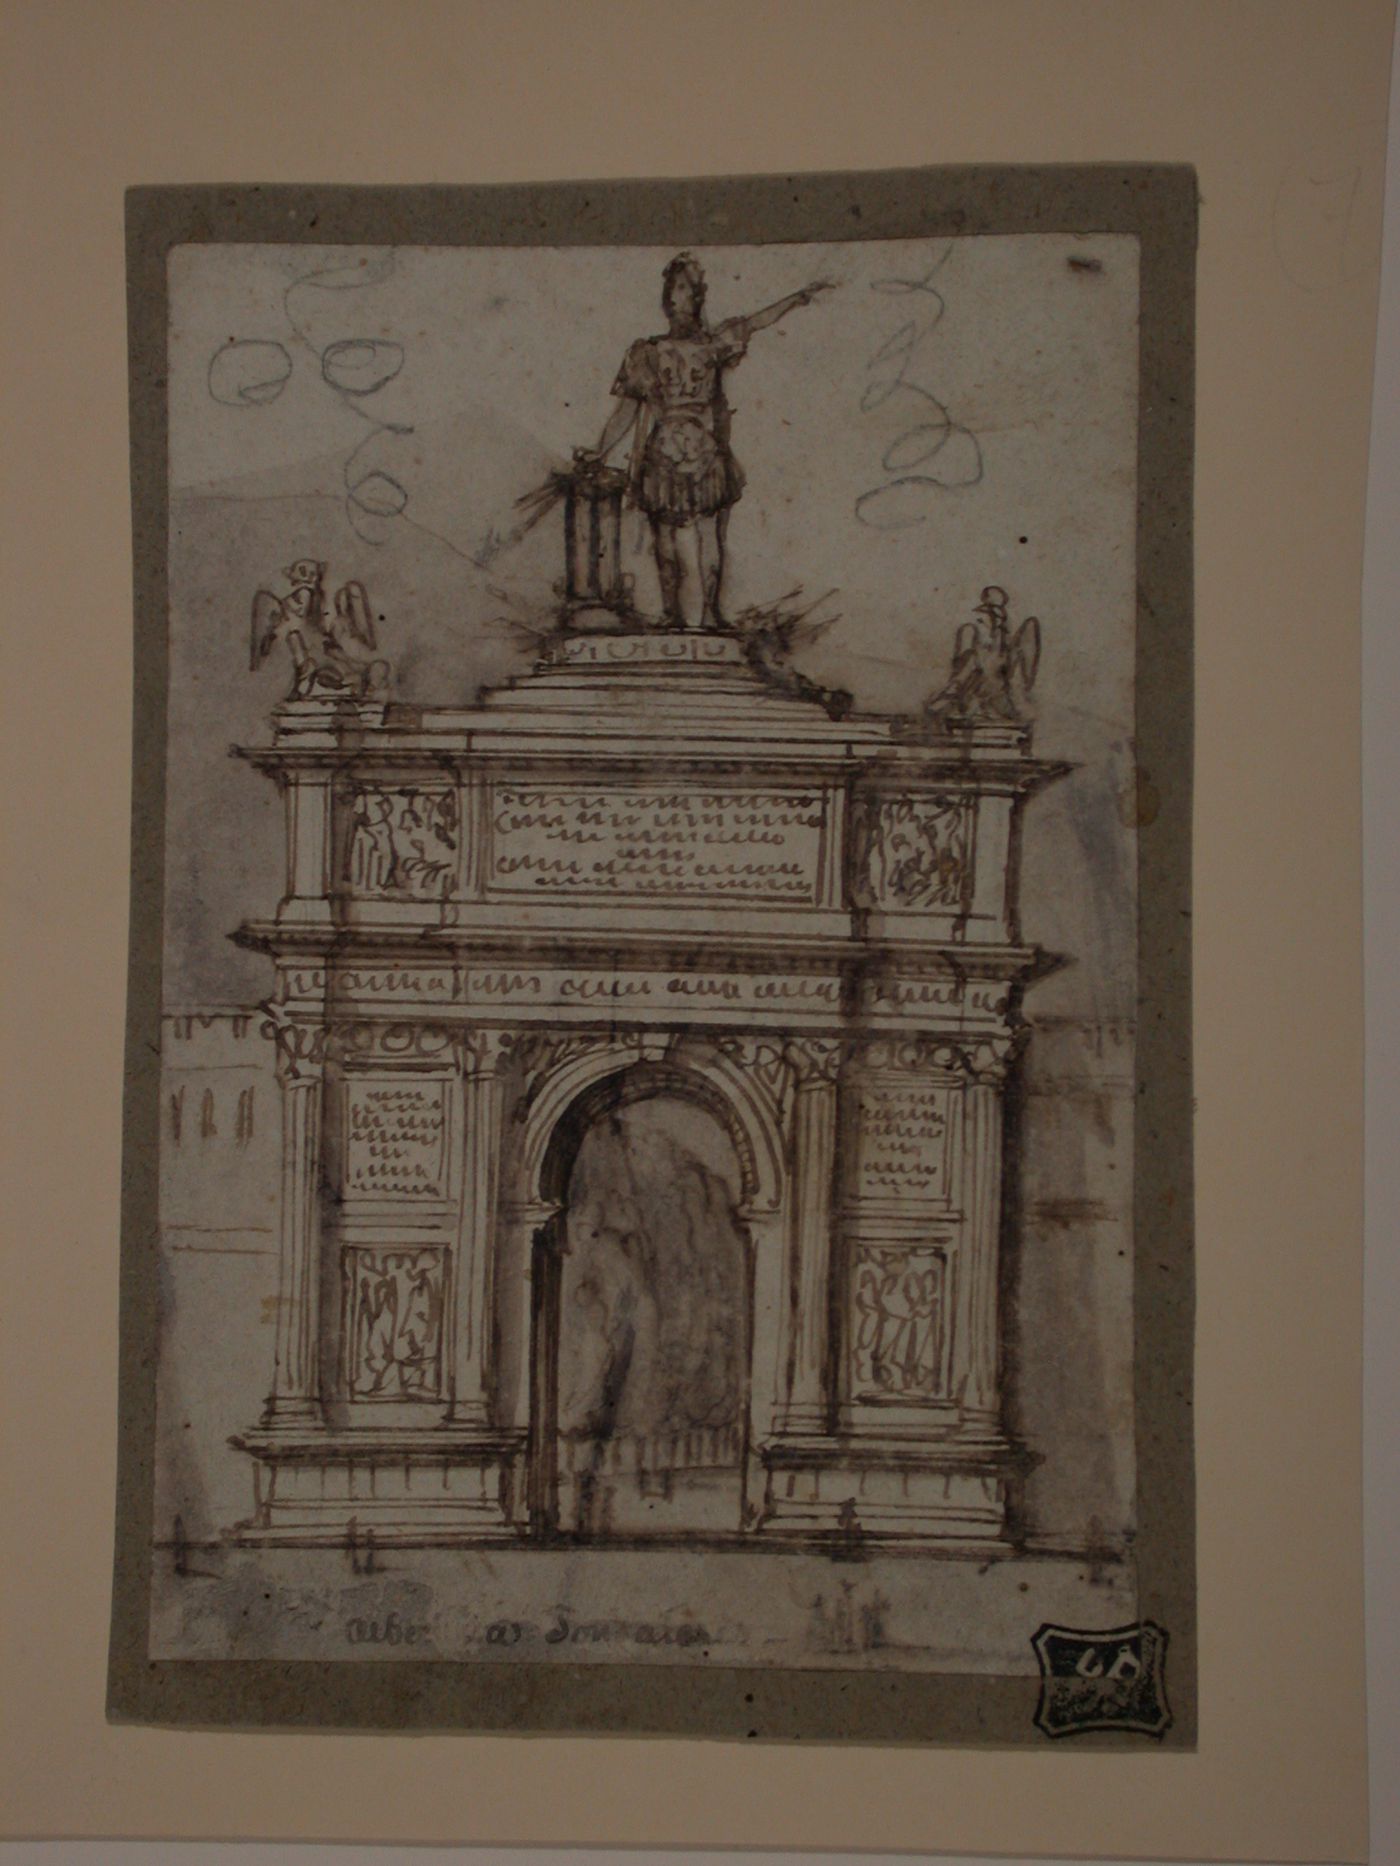 Visionary design for a triumphal arch surmounted by a statue of a man in antique armour flanked by eagles